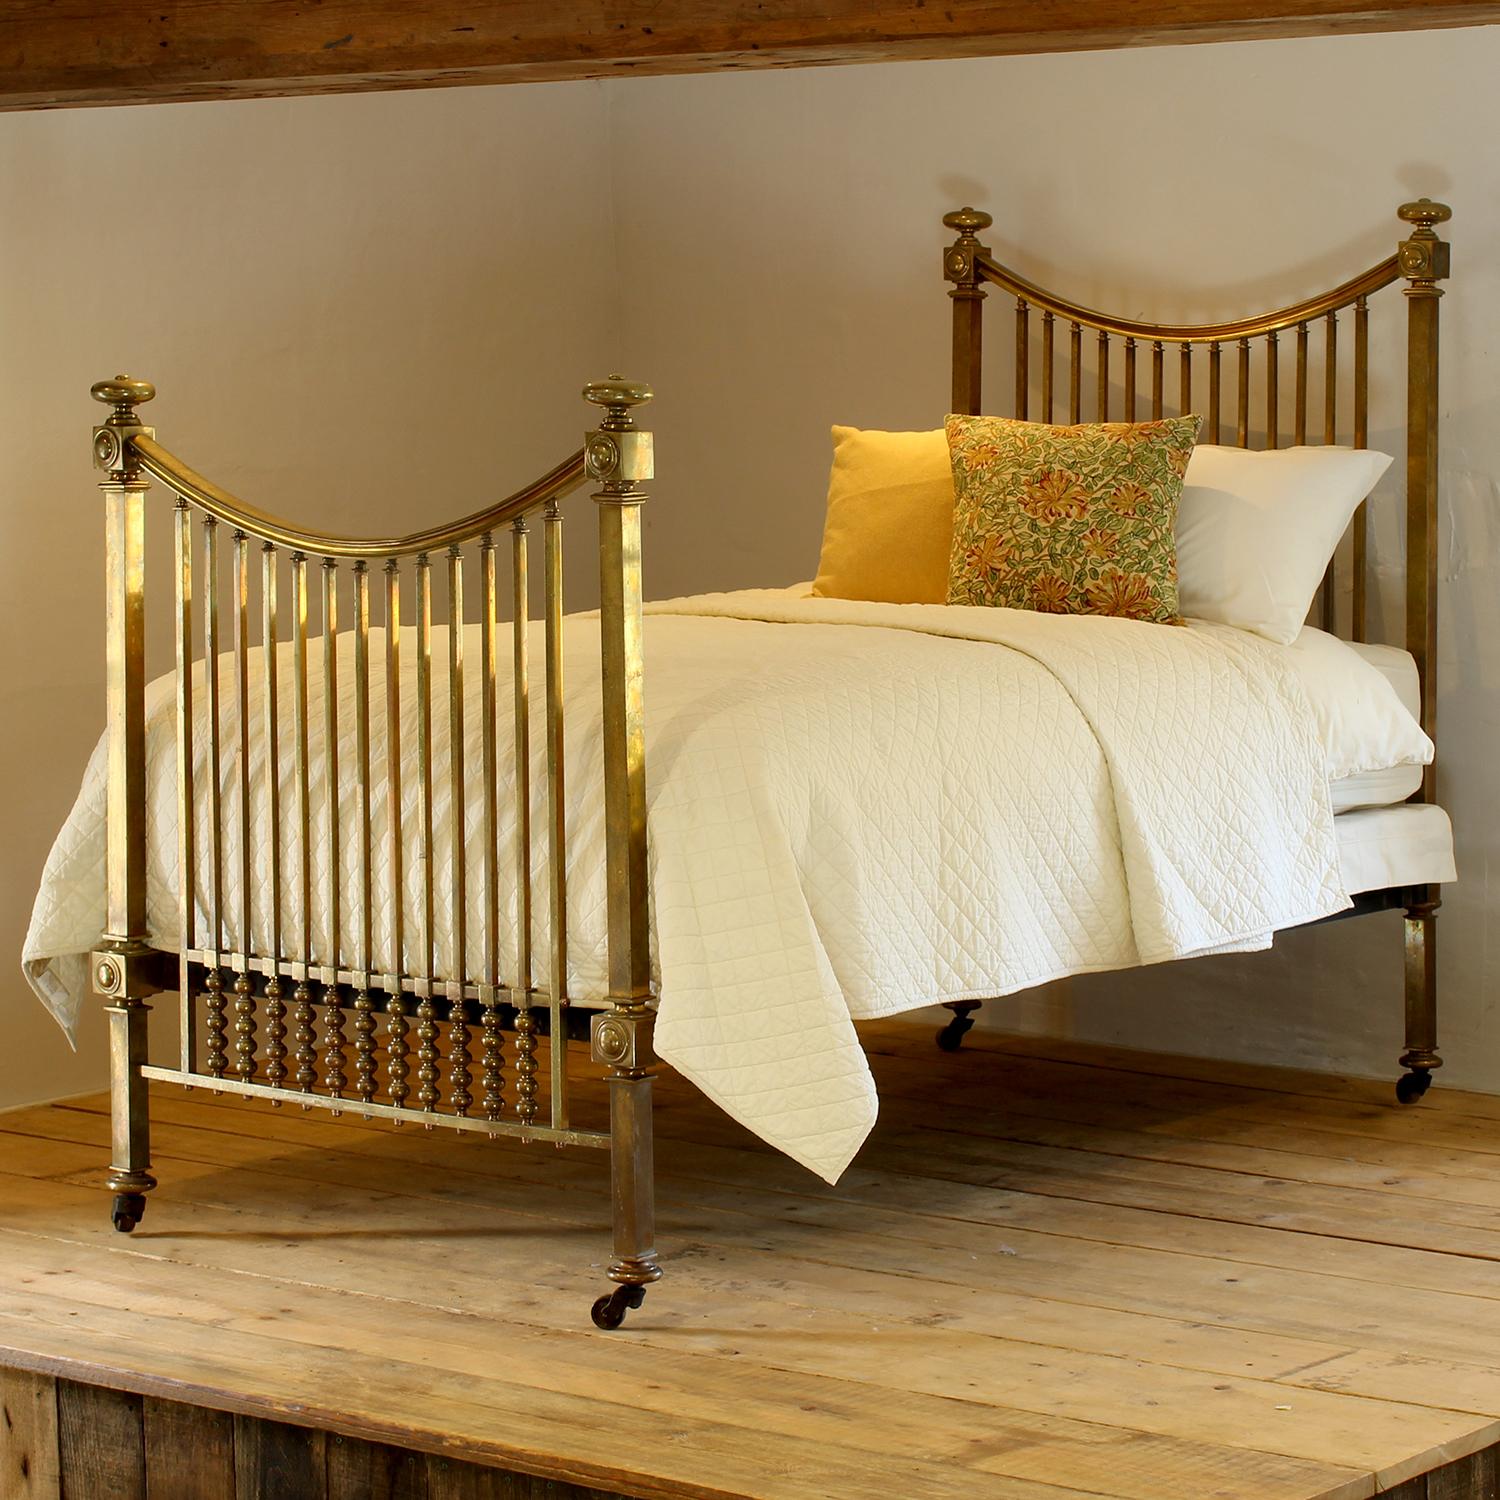 A superb top quality all brass Victorian single antique bed with decorative brass fittings and curved rails.
The bed has an aged patina to the brass and there are a couple of dents on the top rail. We do not feel this reduces the quality of the